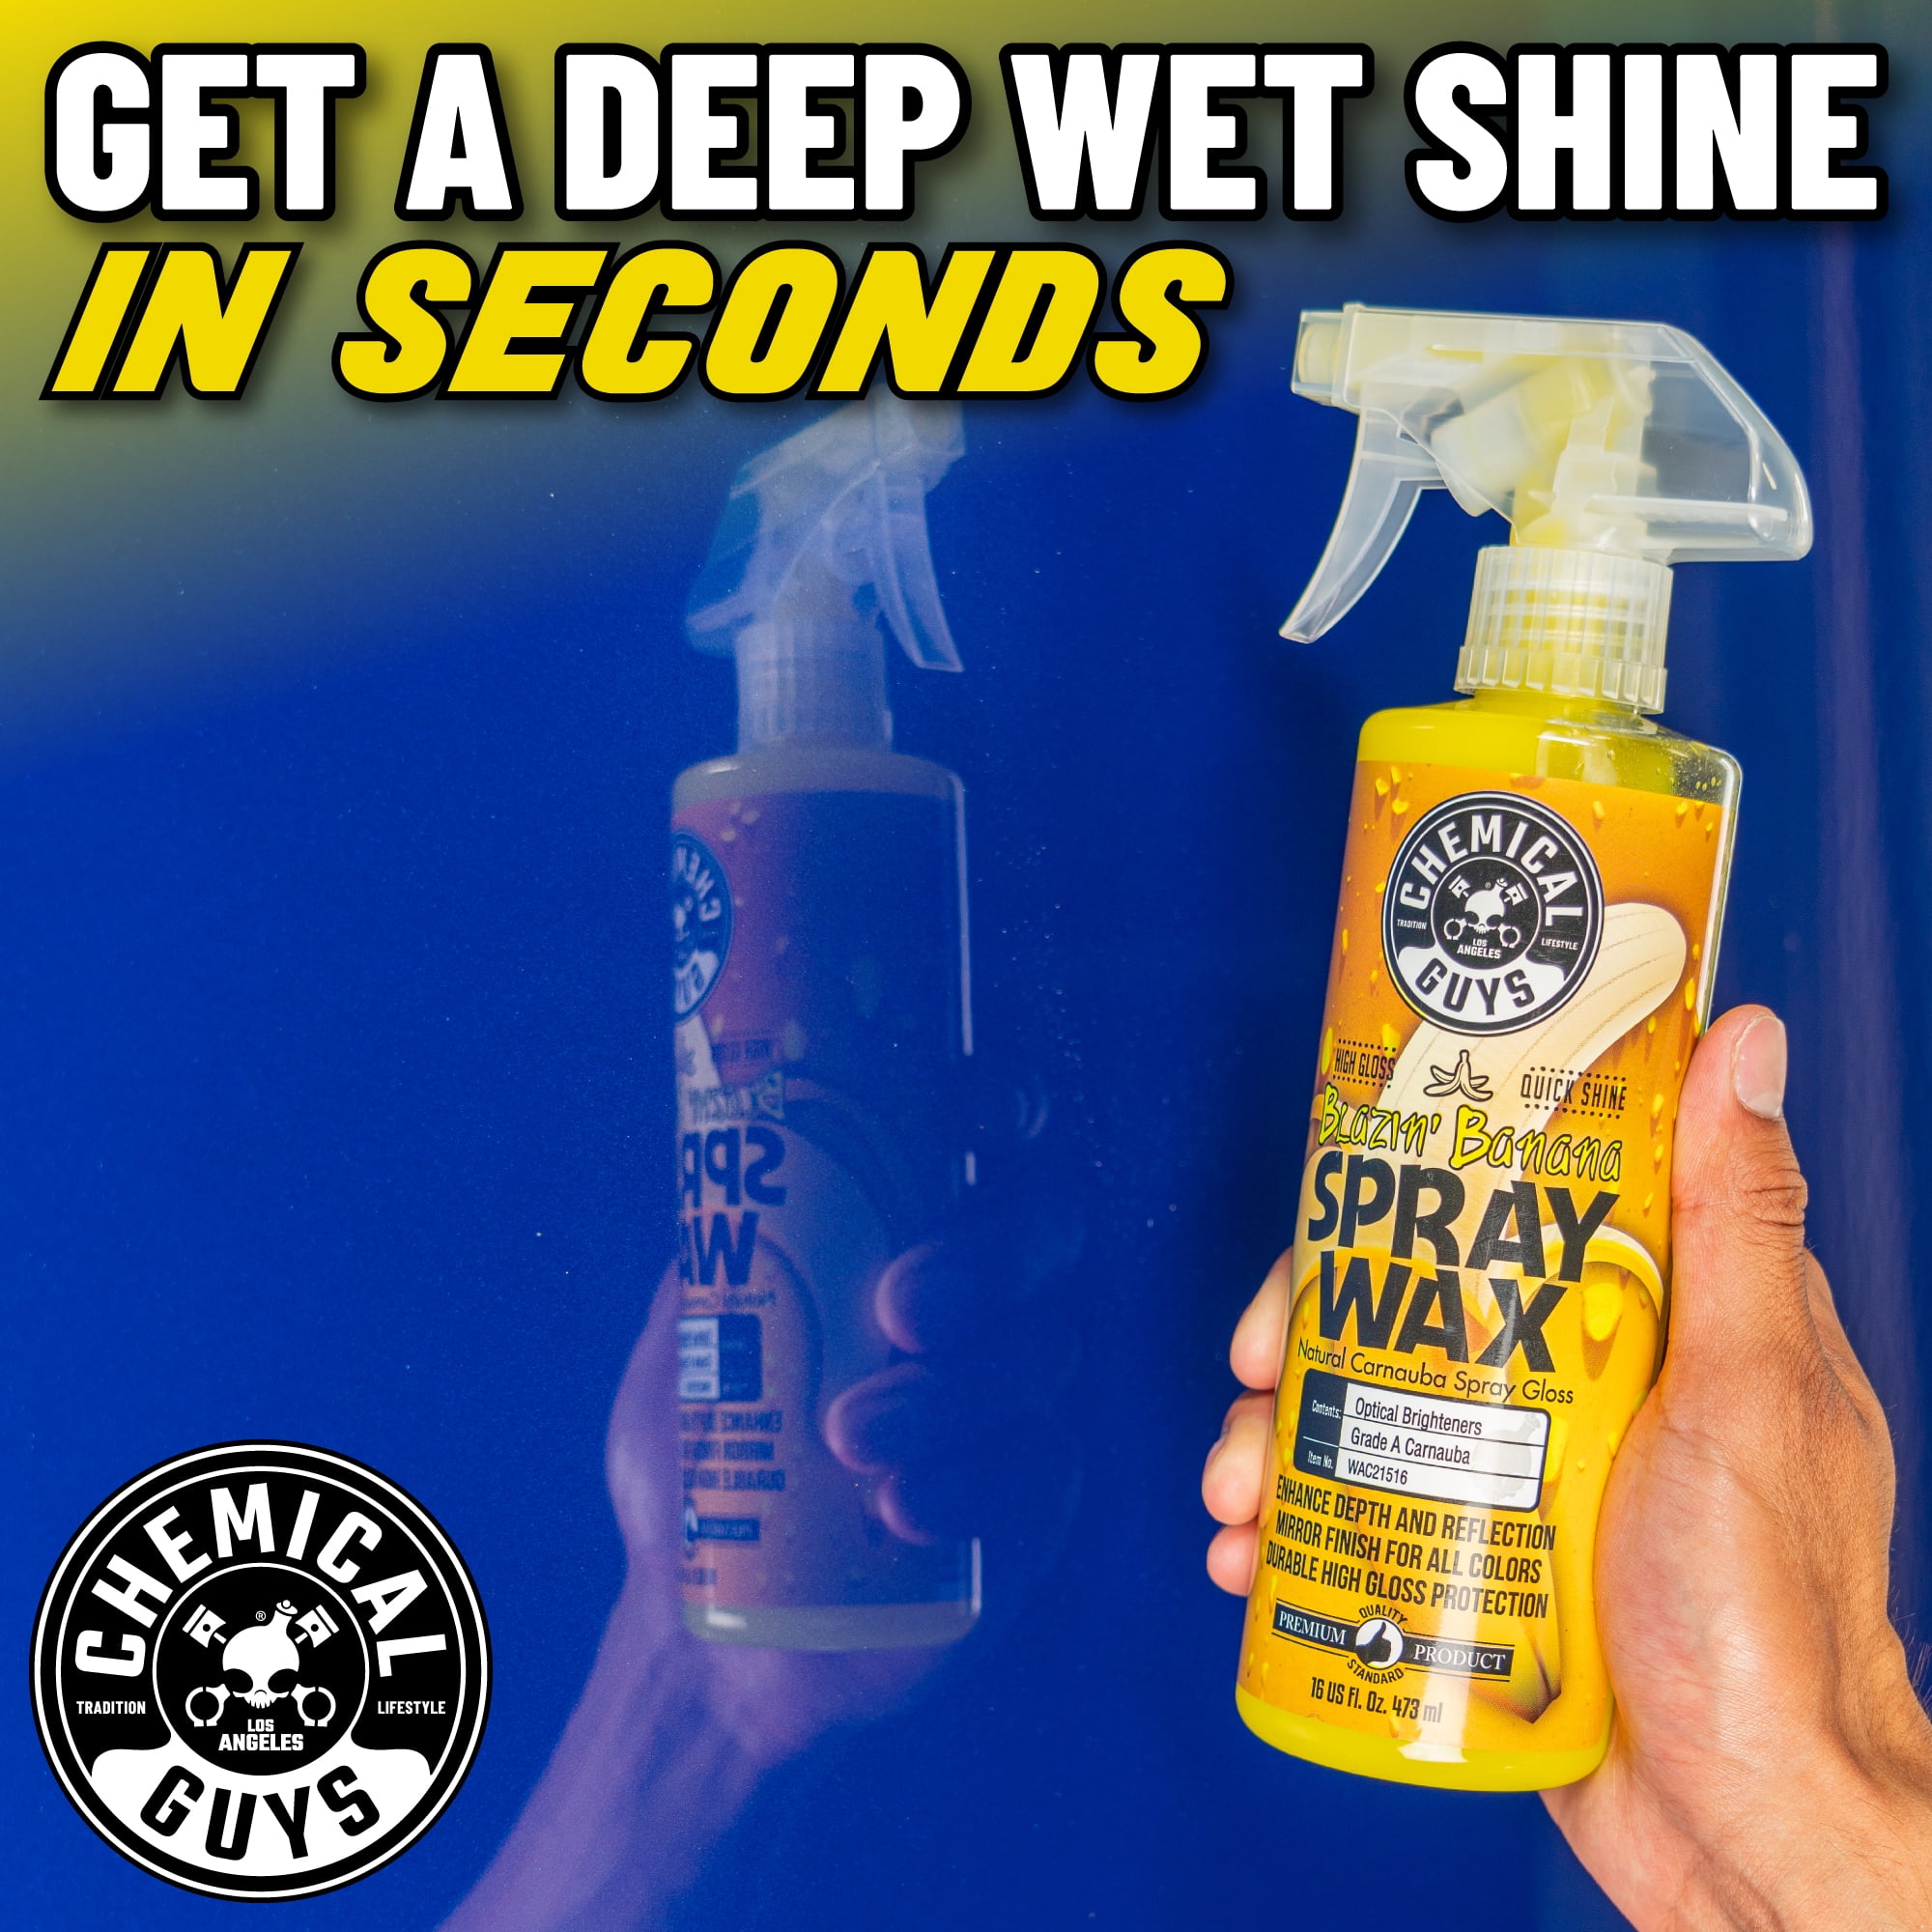 Chemical Guys Blazin' Banana Spray Wax Review with Real RESULTS